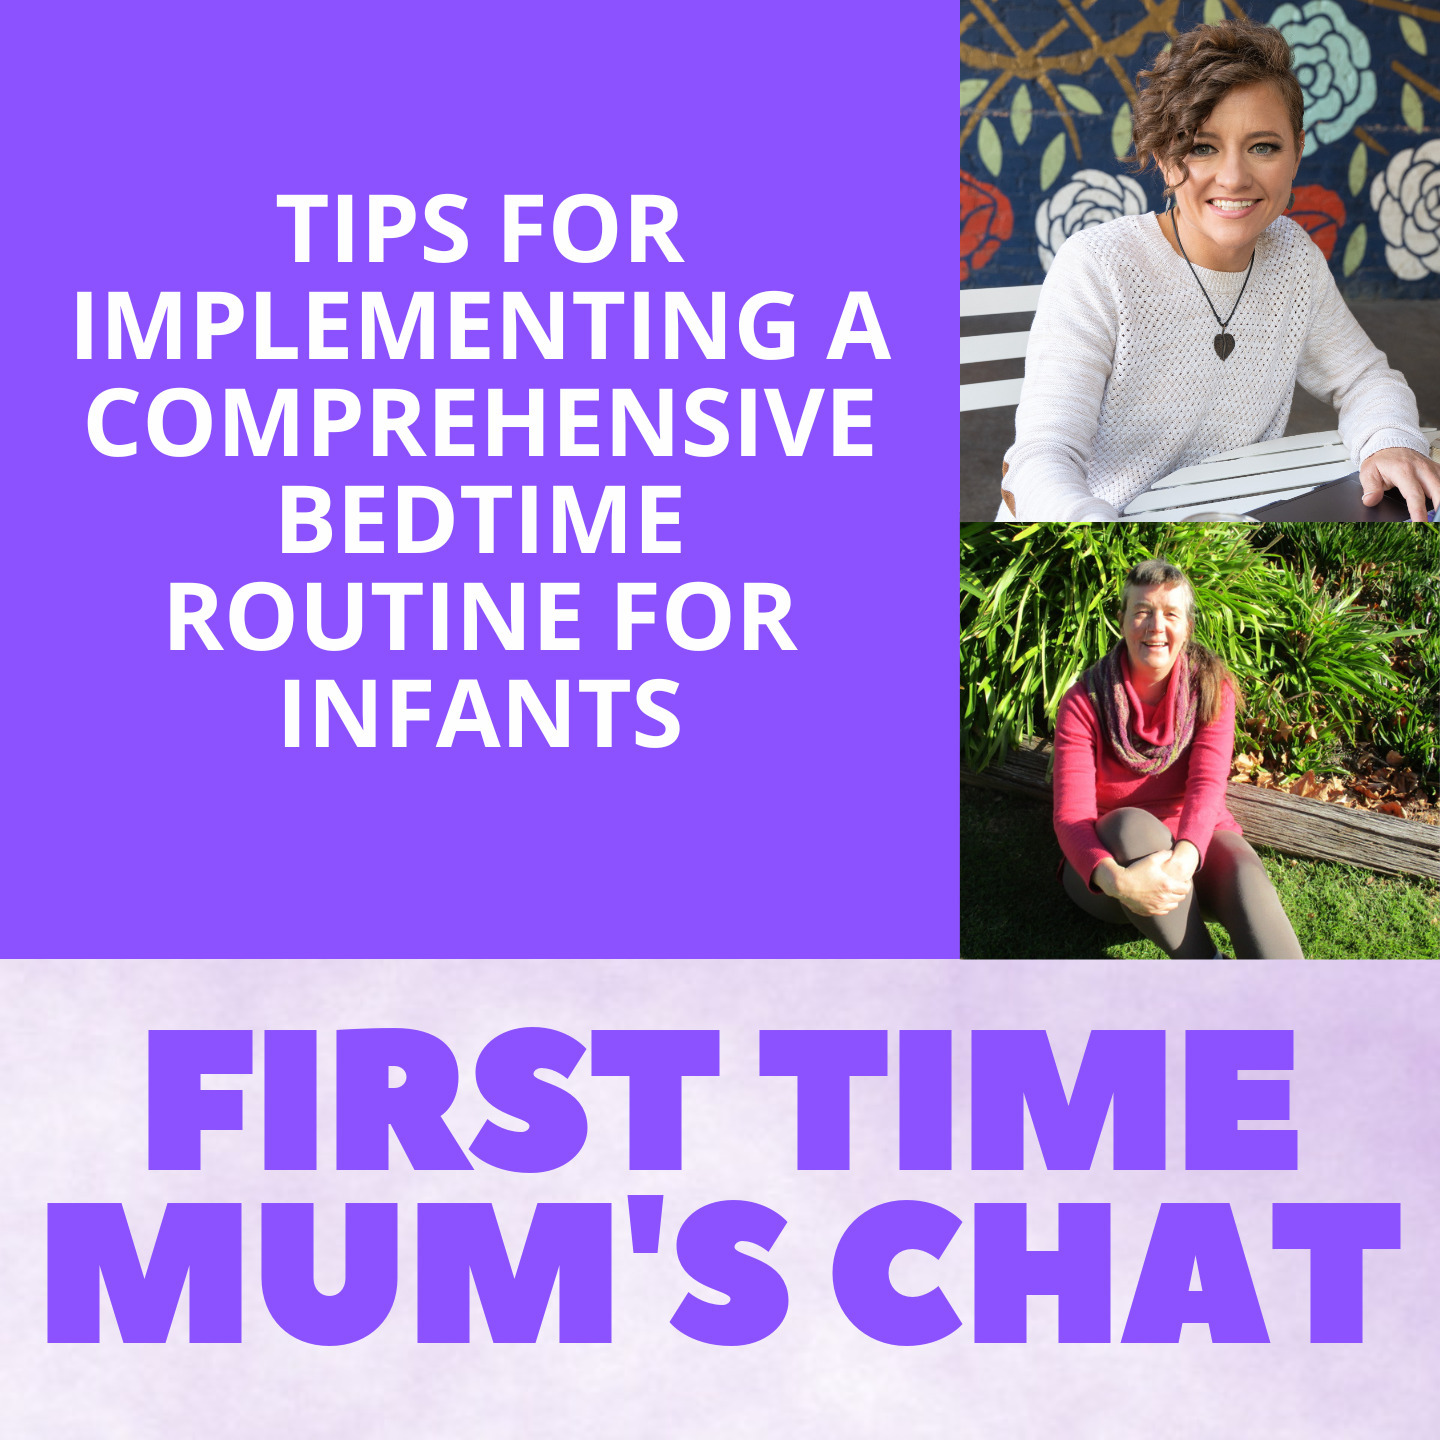 Tips for Implementing a comprehensive bedtime routine for infants